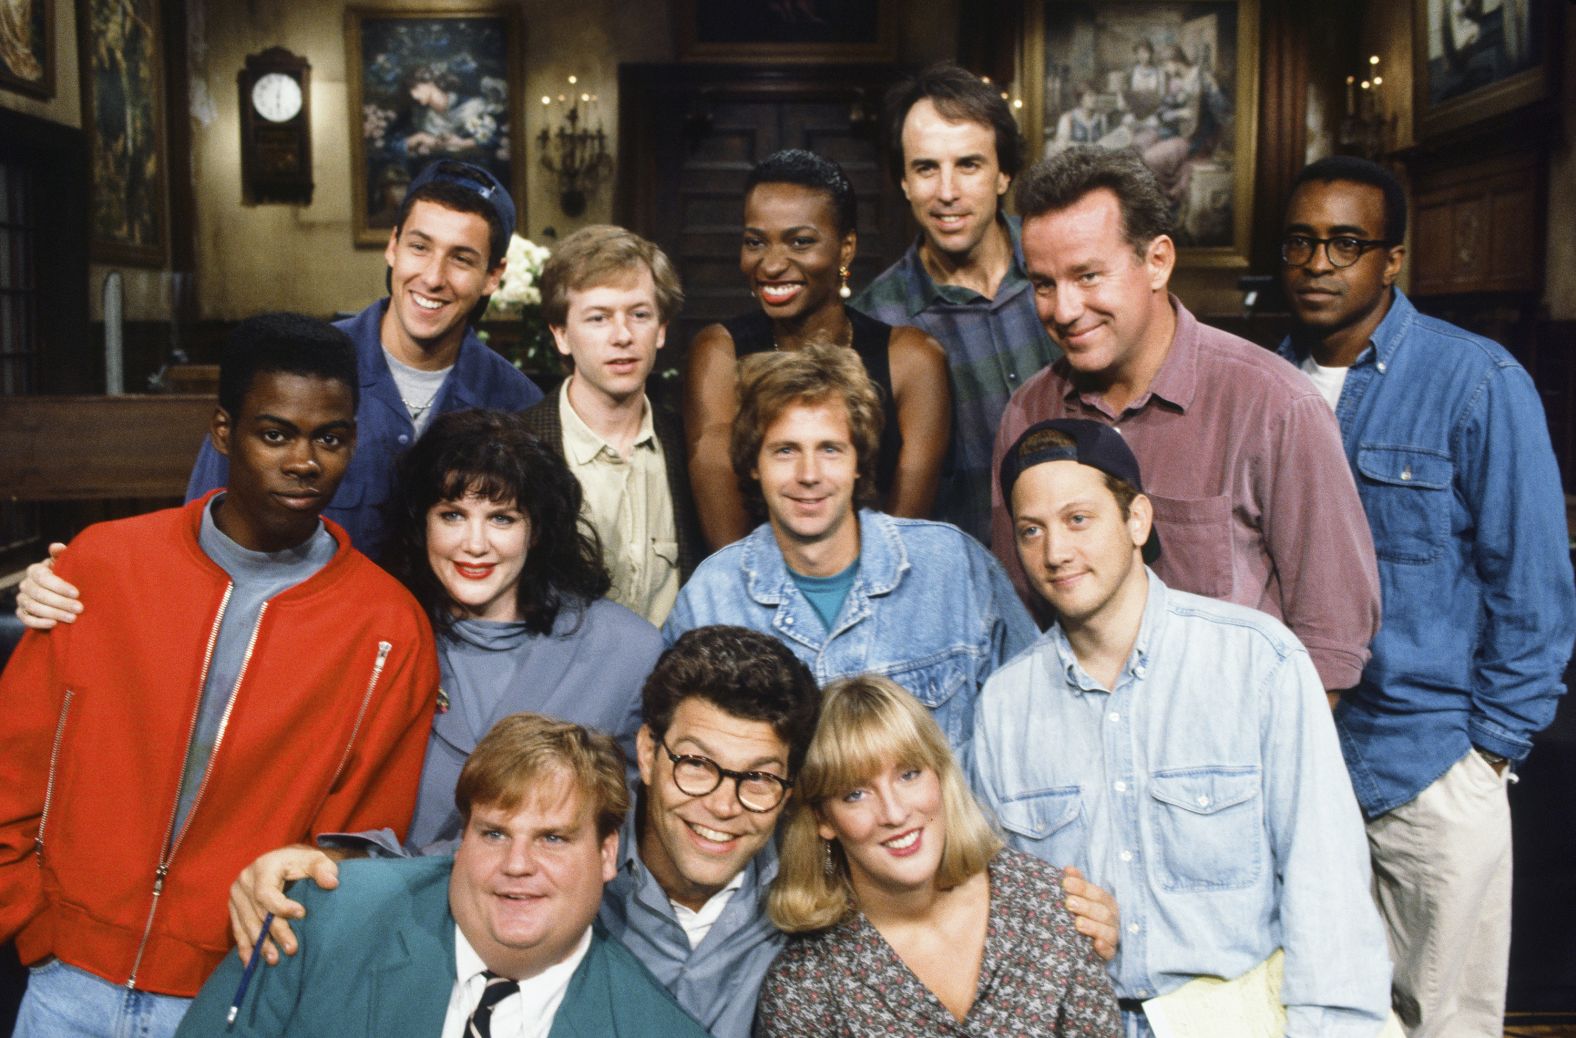 Sandler, top left, poses with other members of the "Saturday Night Live" cast in 1992. Before he joined the cast, Sandler was a writer for the show. With him in the top row, from left, are David Spade, Ellen Cleghorne, Kevin Nealon, Phil Hartman and Tim Meadows. In the second row are Chris Rock, Julia Sweeney, Dana Carvey and Rob Schneider. At the bottom are Chris Farley, Al Franken and Melanie Hutsell.